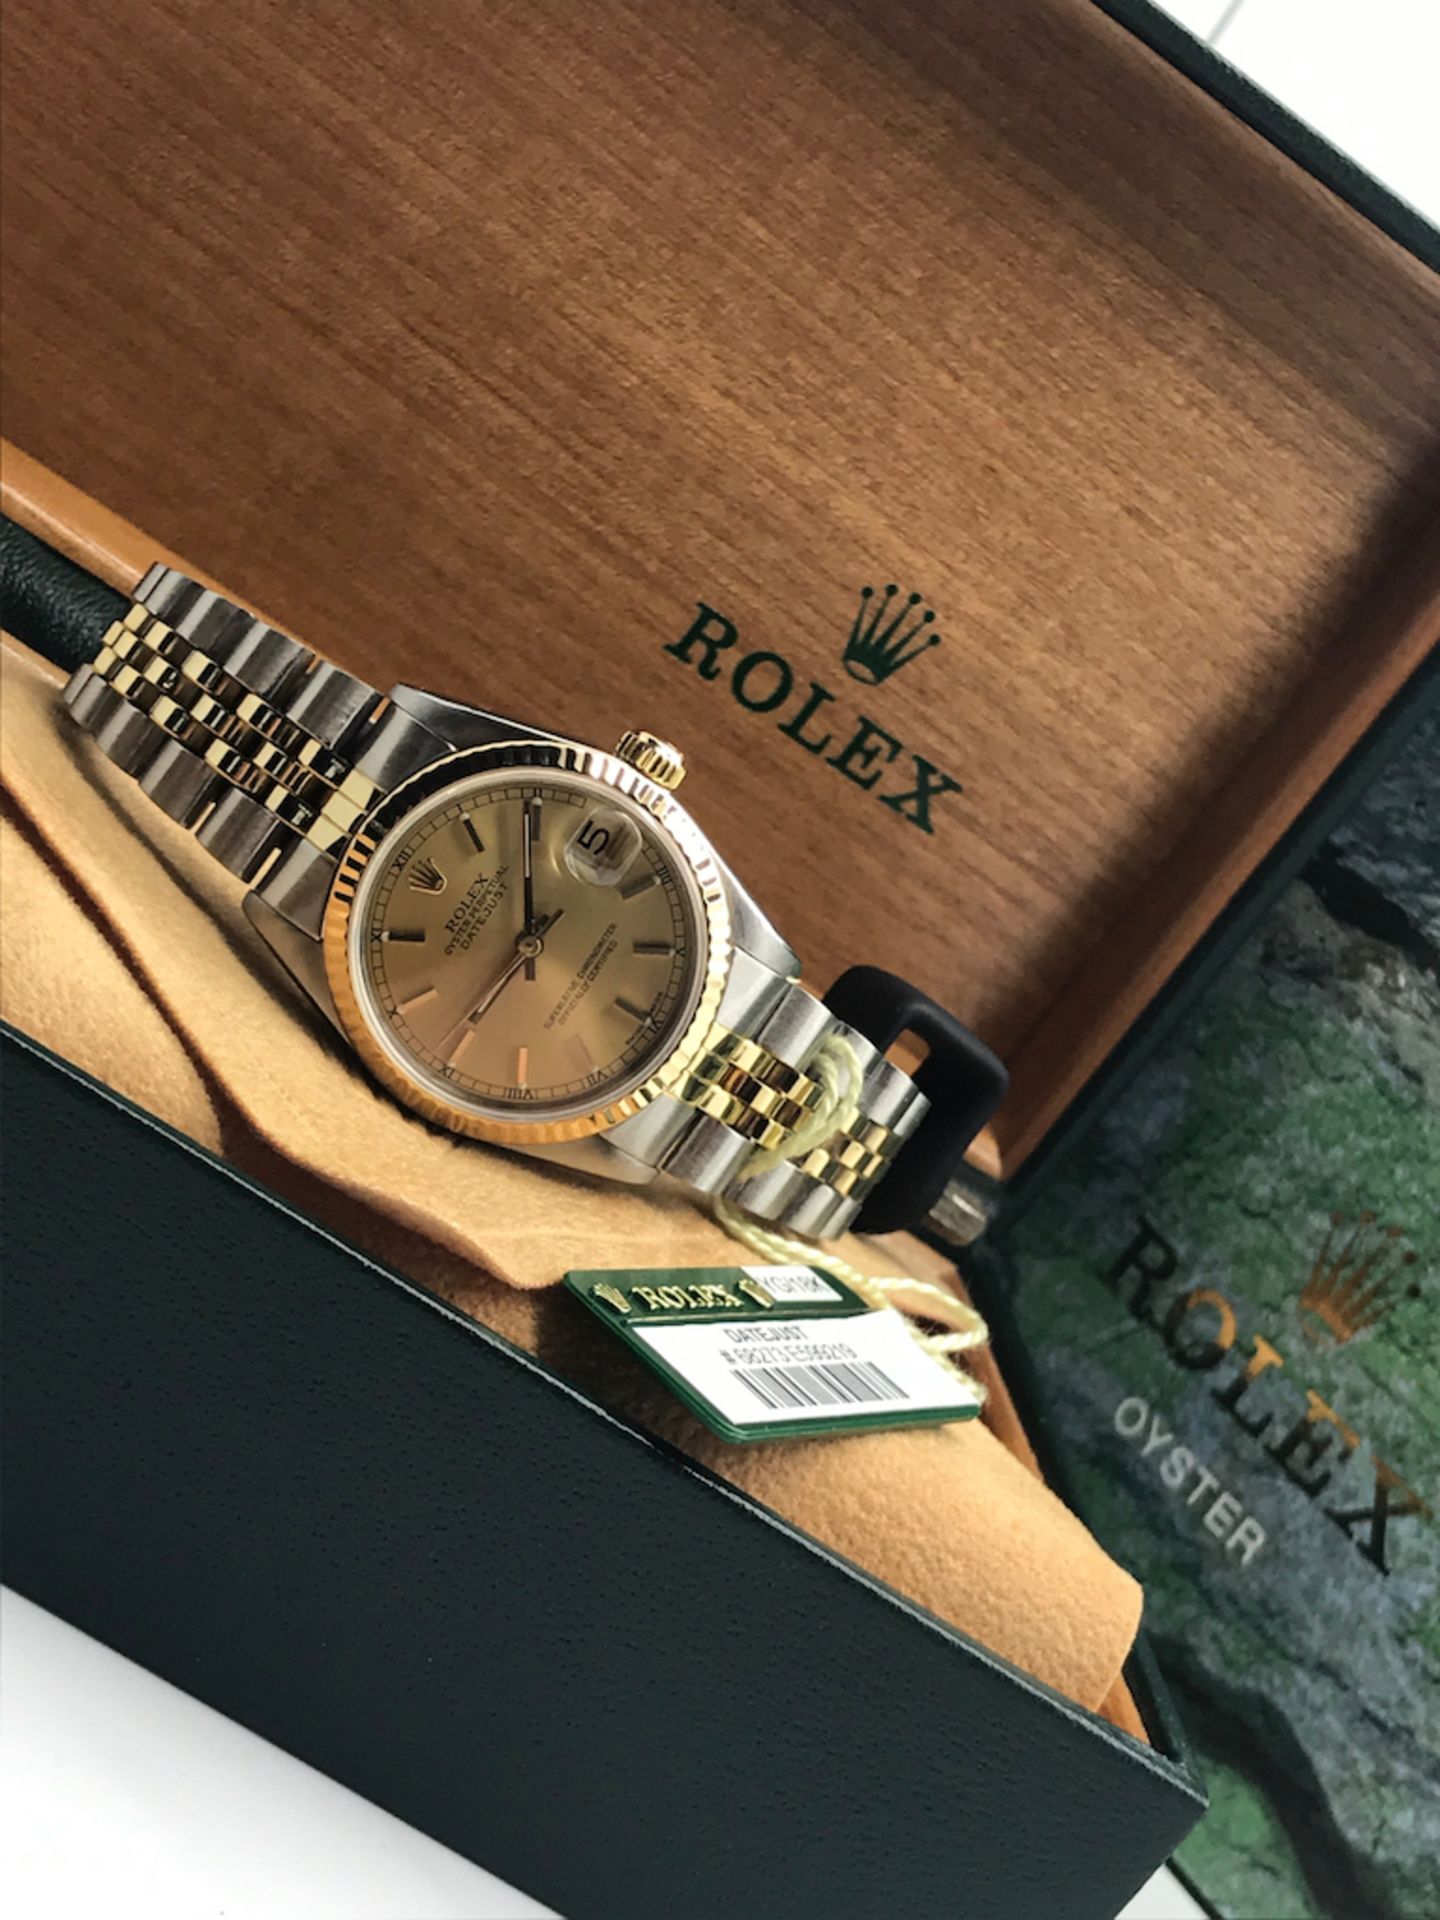 Rolex Datejust 'Champagne' 31mm (Mid-size) Ref. 68273 - Steel/ 18ct Yellow Gold - Image 2 of 6